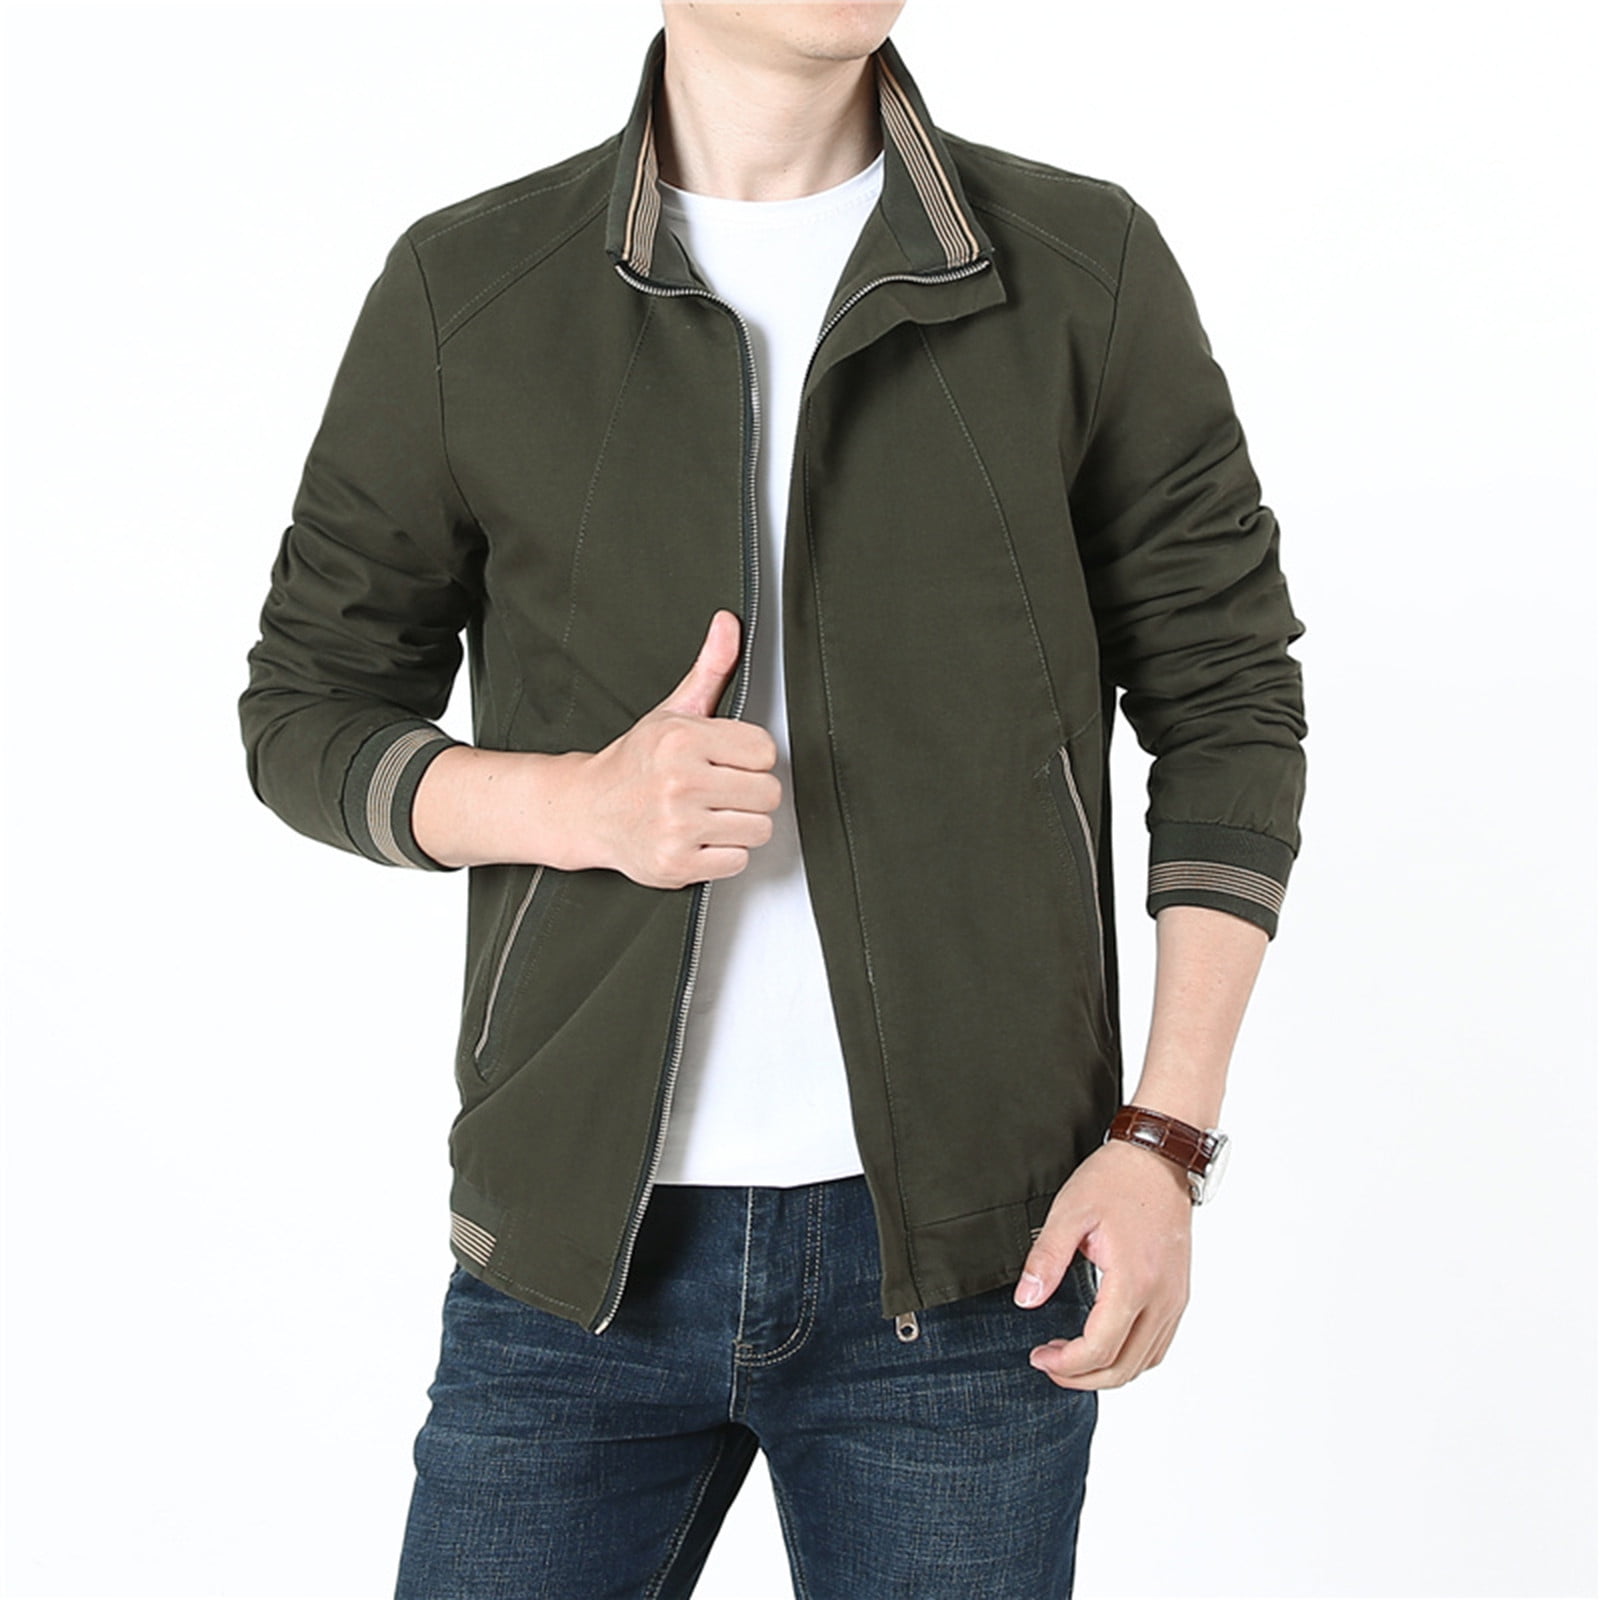 shenzhenyubairong Mens Jackets Casual Stylish Men Casual Long Sleeve Autumn Winter Stand Neck Top Blouse Coat Jacket with Pockets Down Jacket for Mens